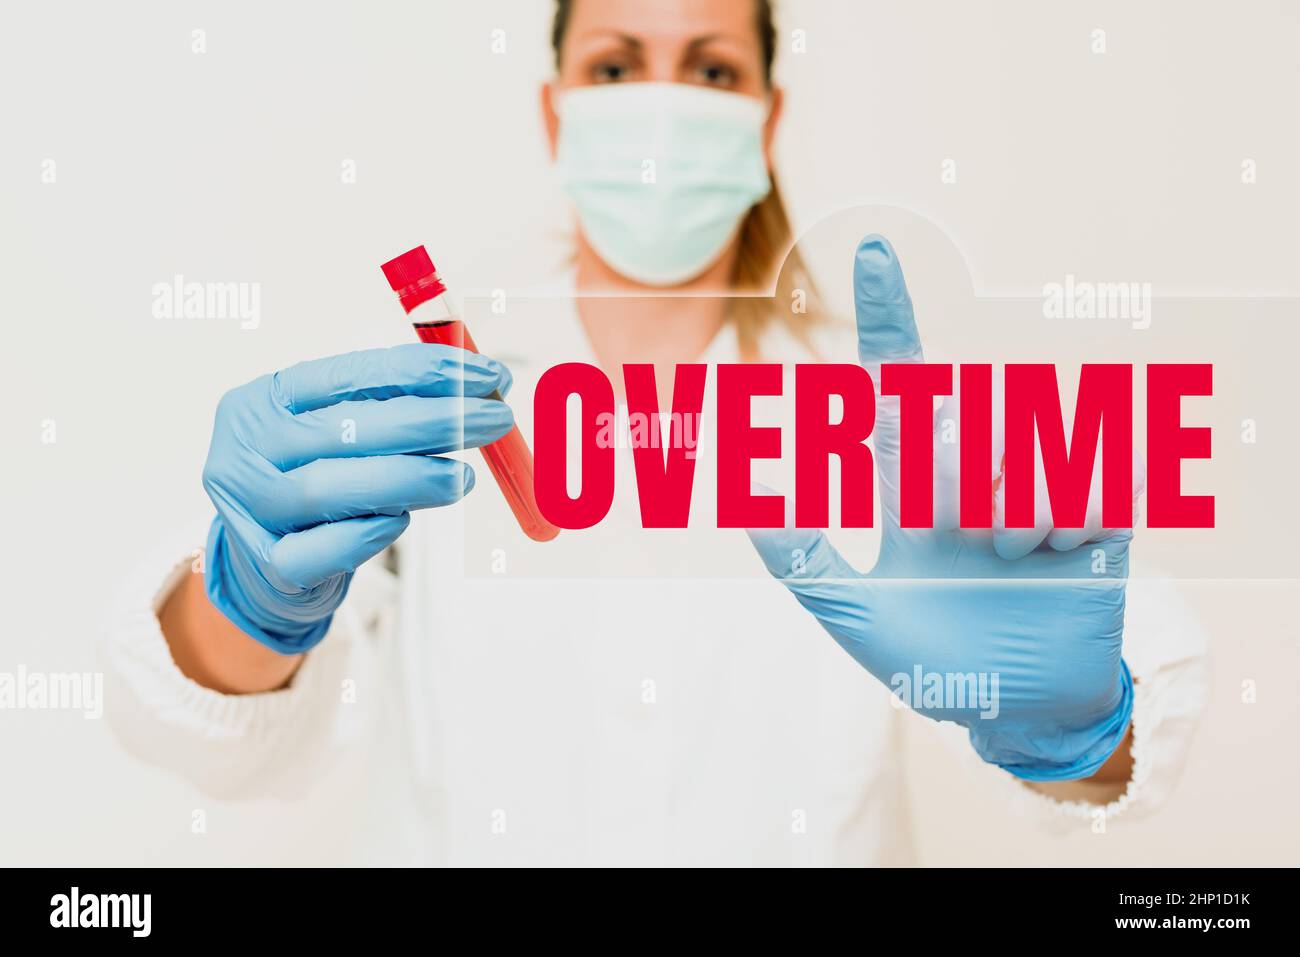 Text caption presenting Overtime, Business idea Time or hours worked in addition to regular working hours Studying Toxic Virus Analyzing Viral Discove Stock Photo